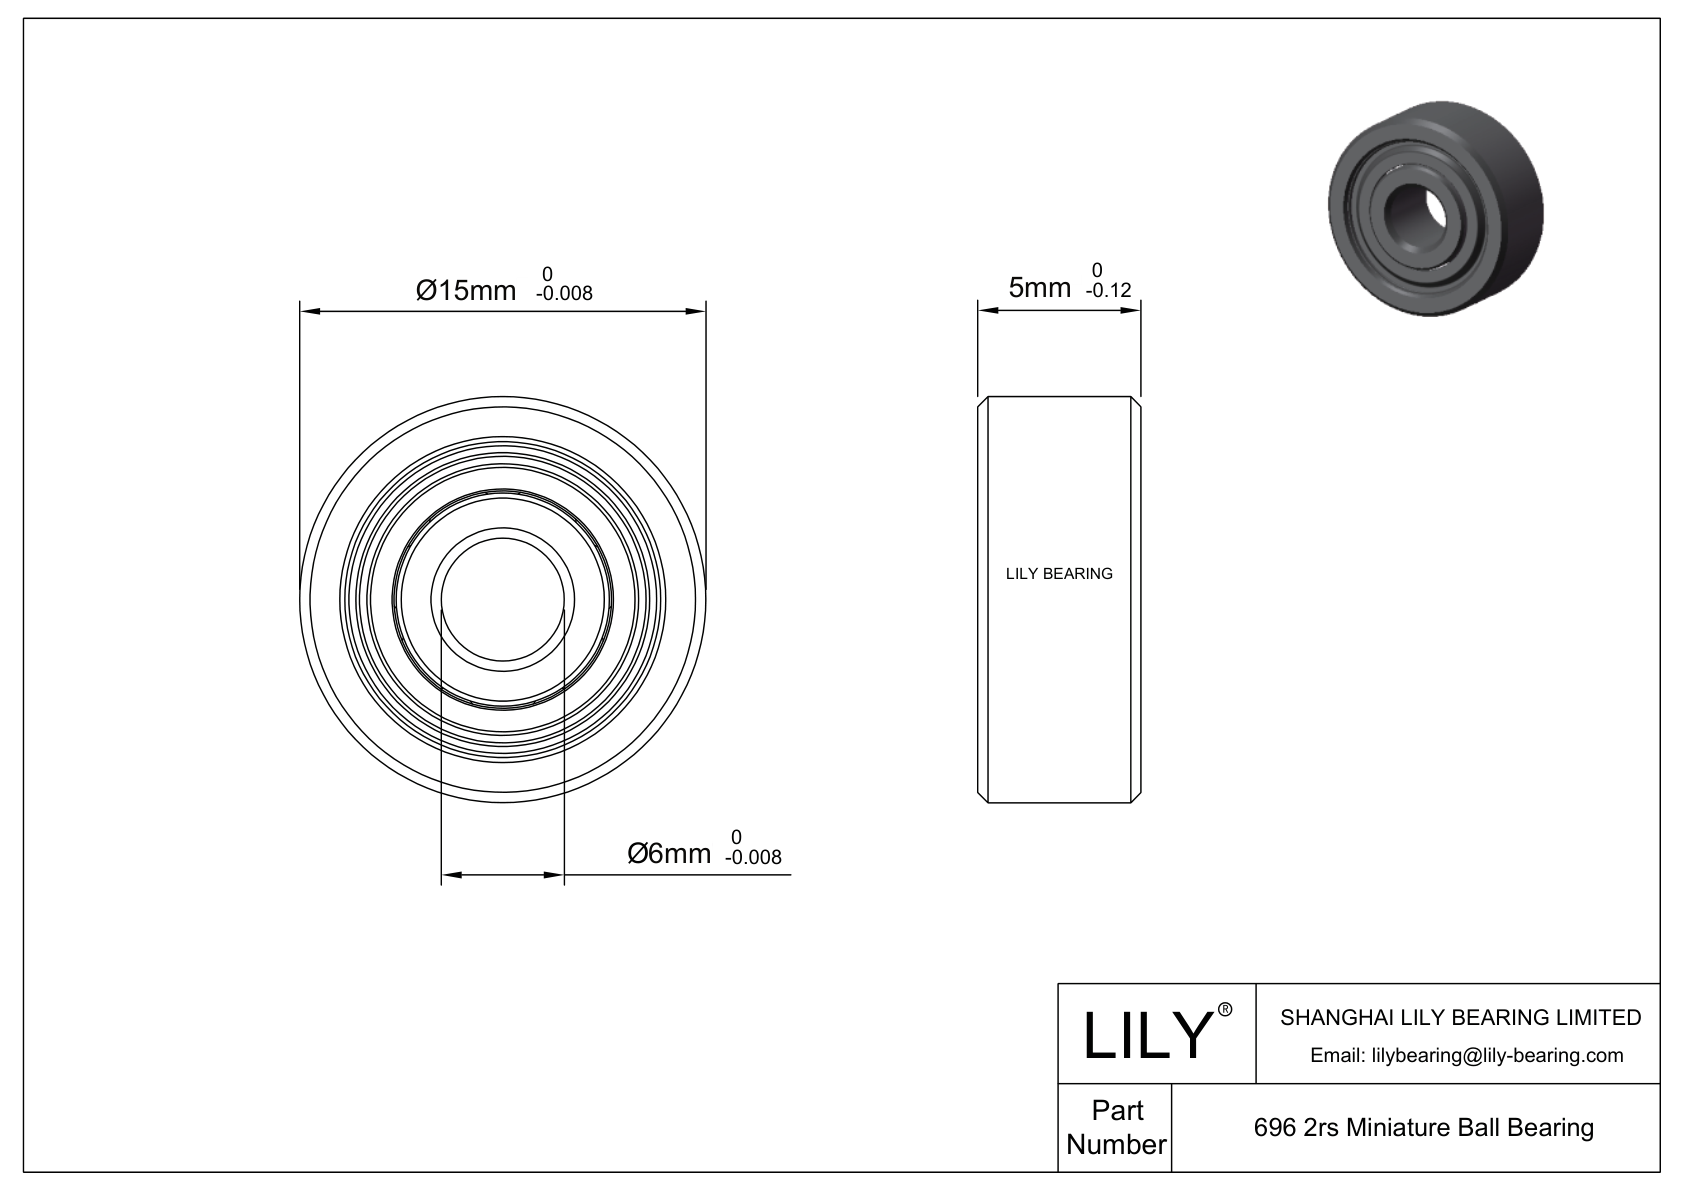 LILY-BS69619-5 POM Coated Bearing cad drawing